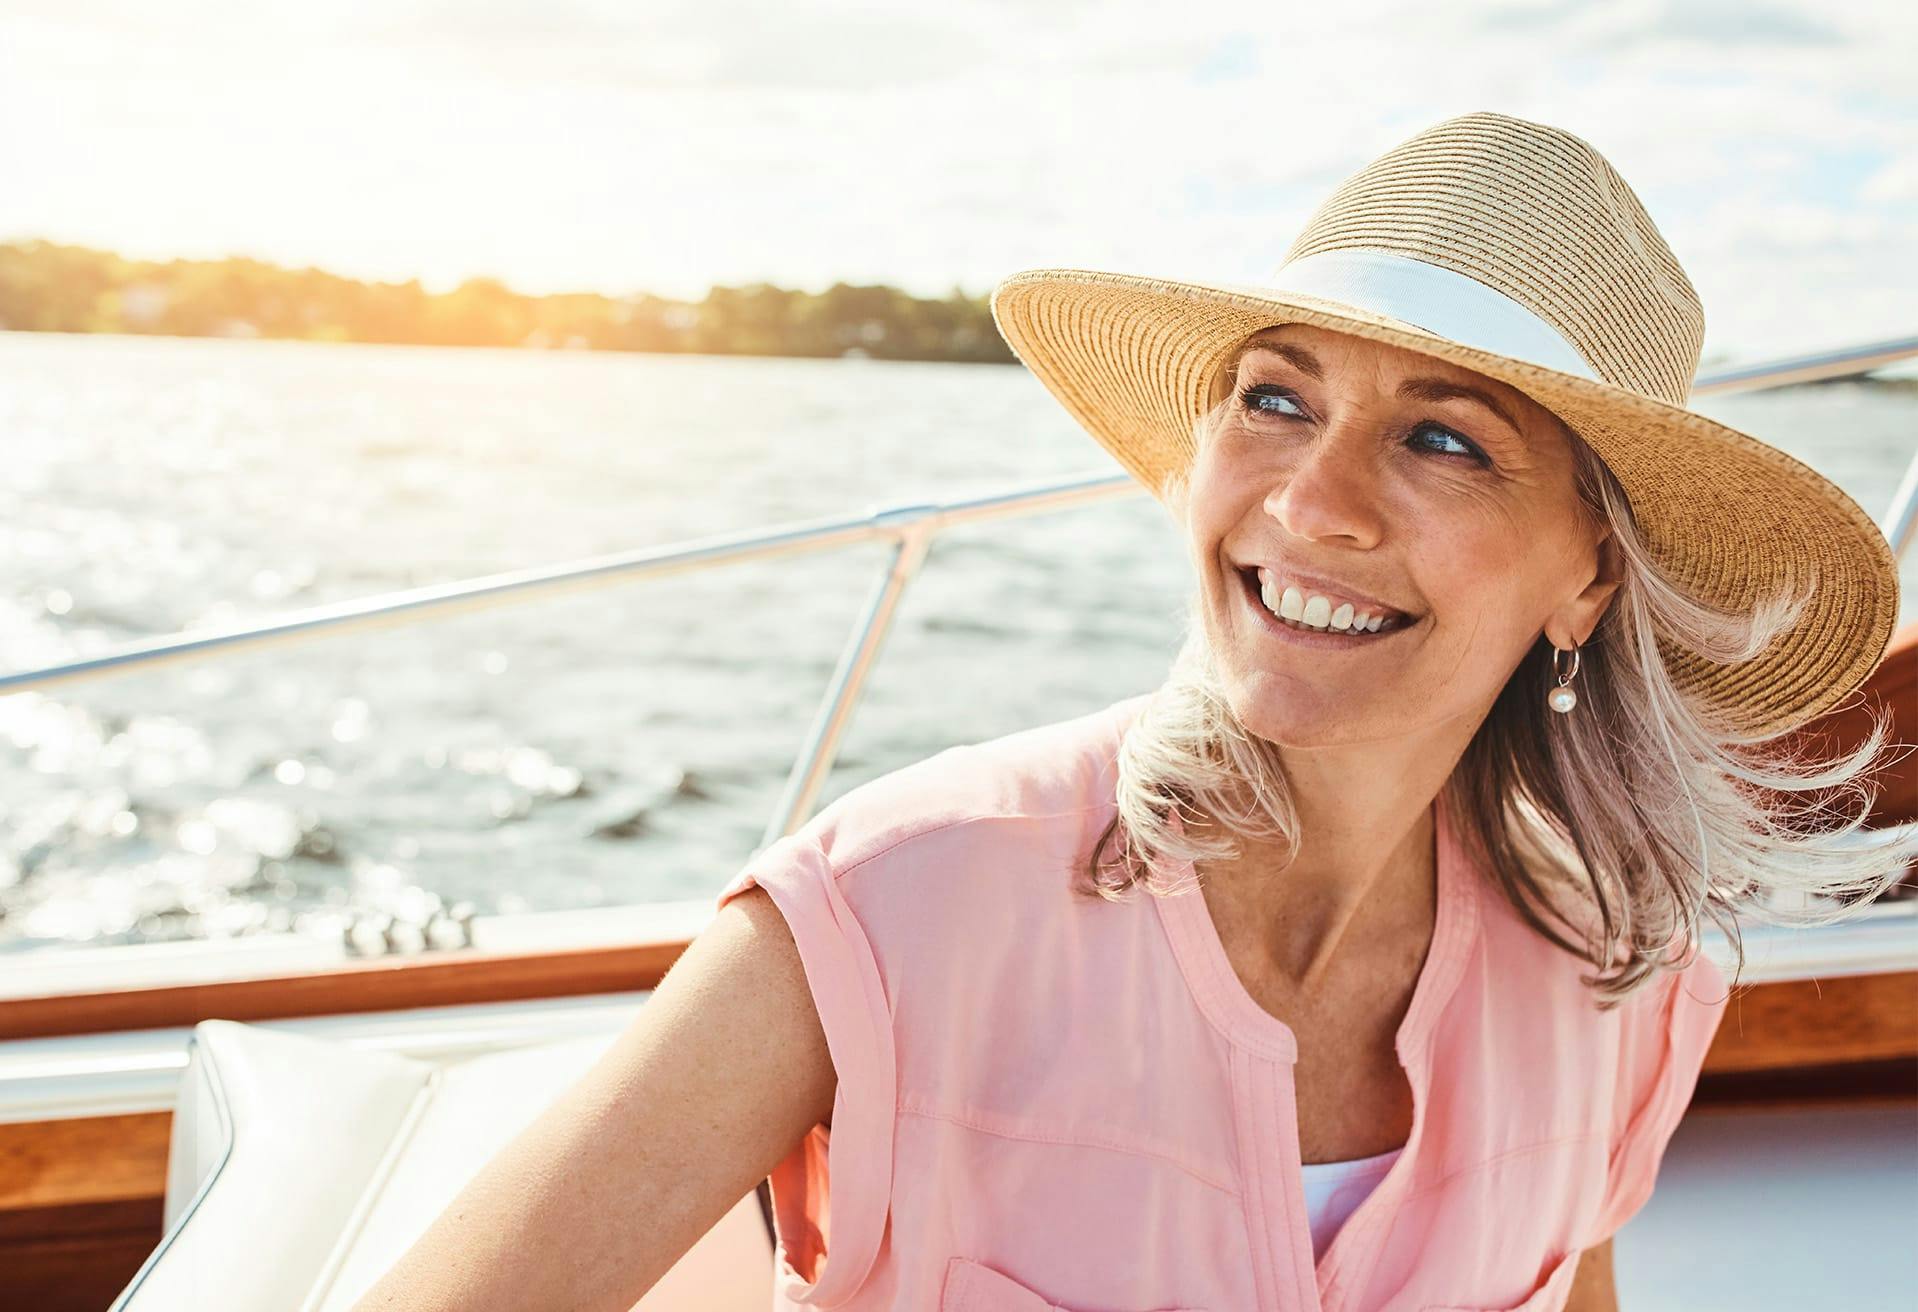 Woman on a boat wearing a sunhat